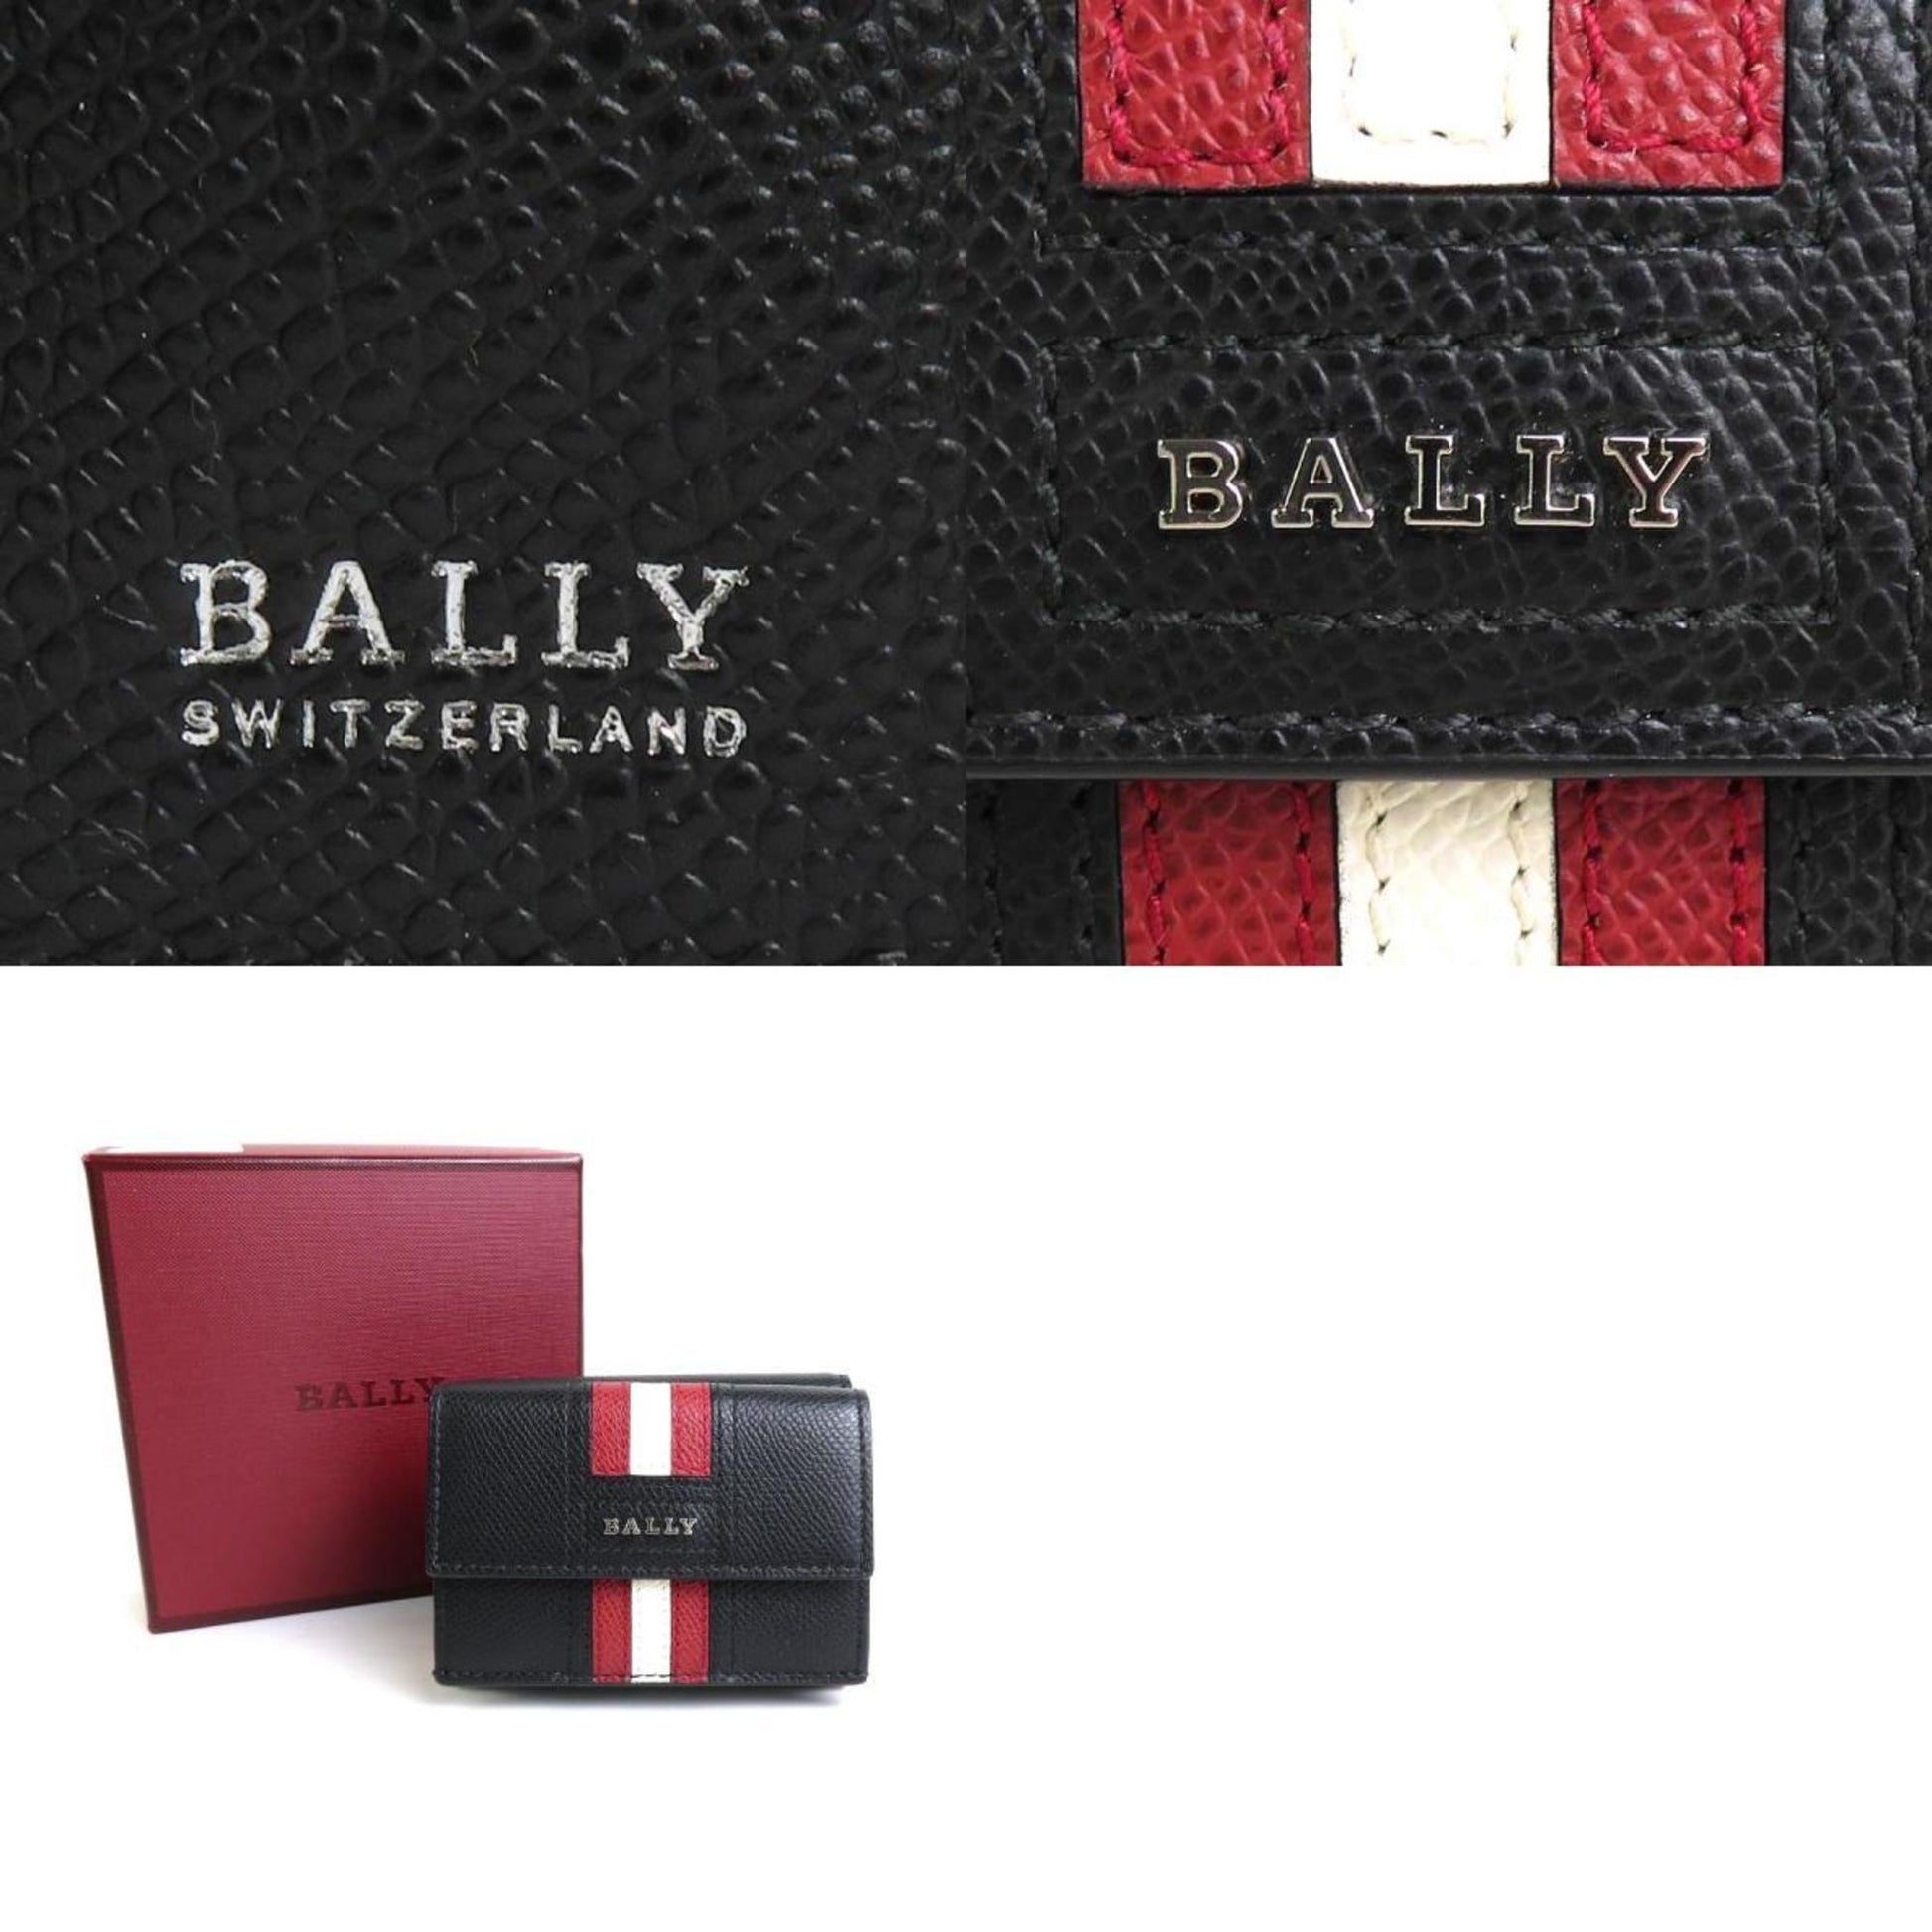 BALLY Trifold Wallet Leather Black x Red White Unisex